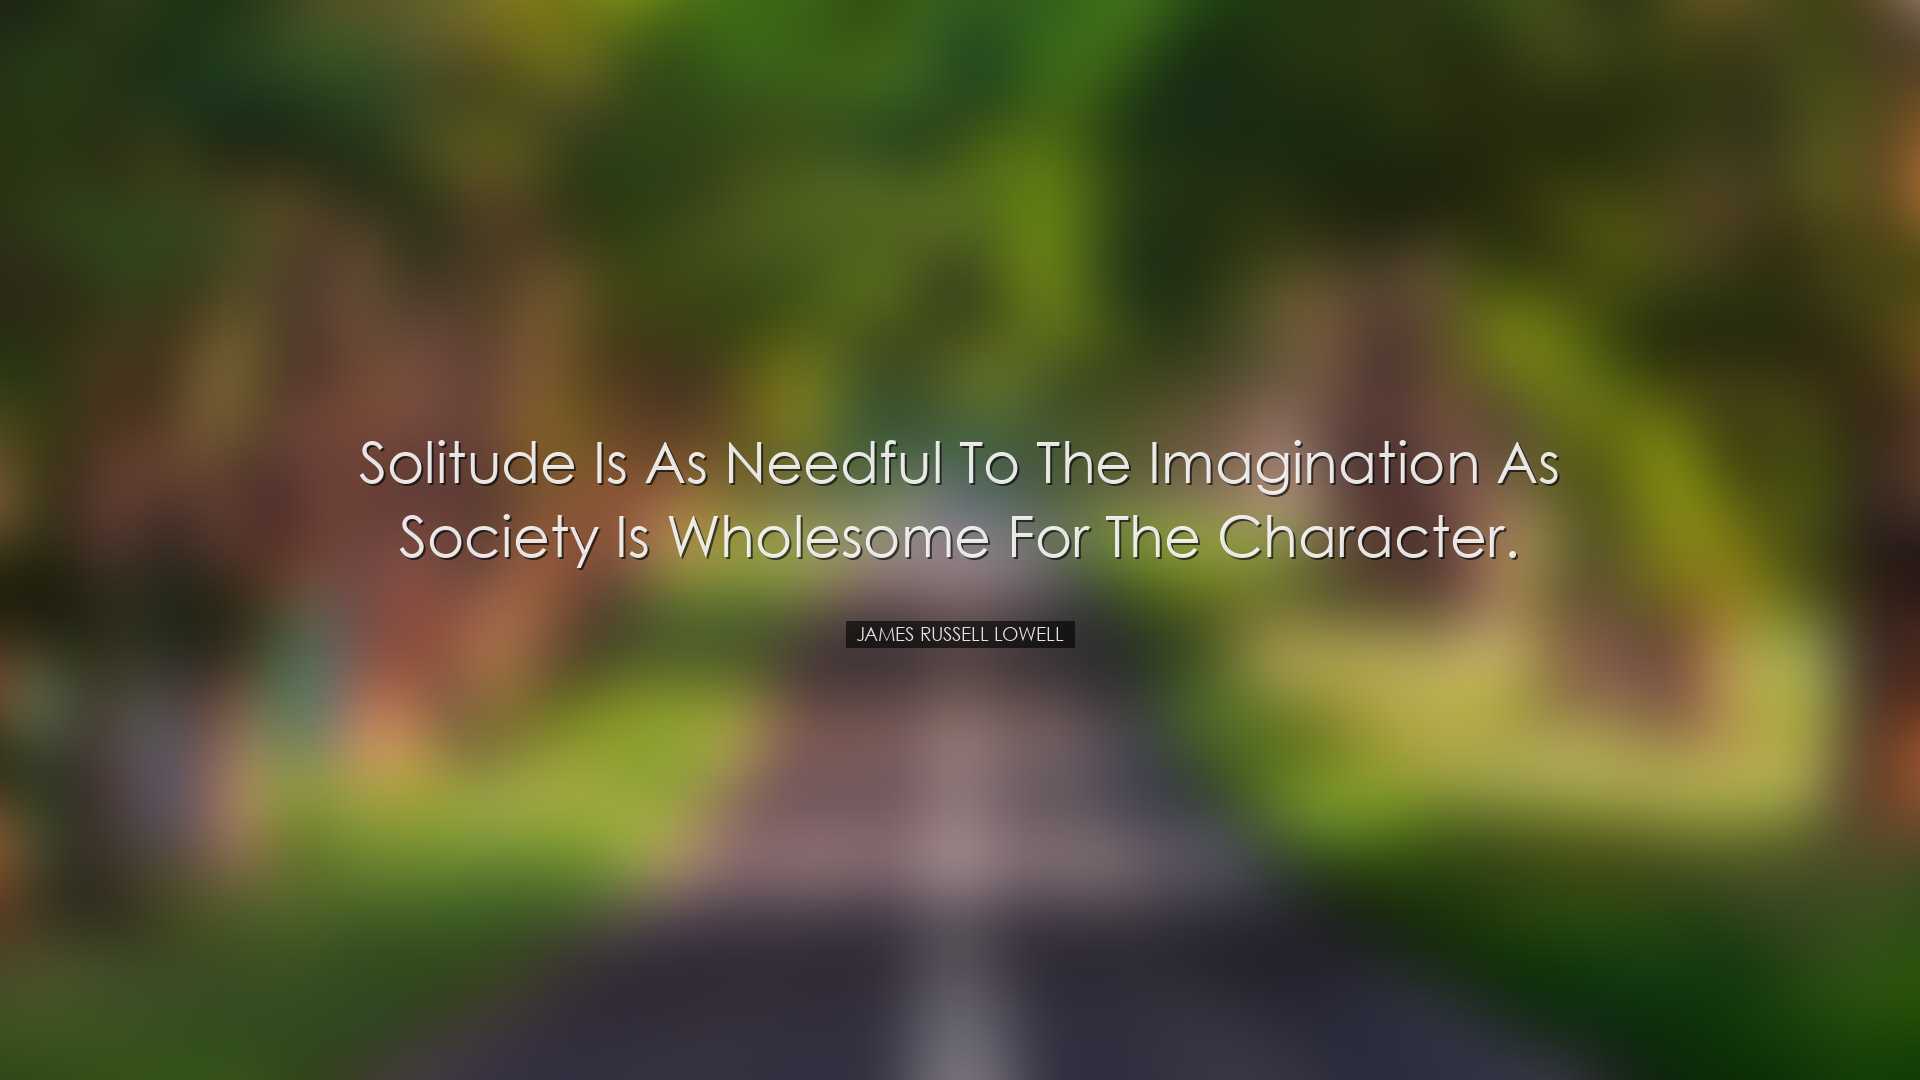 Solitude is as needful to the imagination as society is wholesome